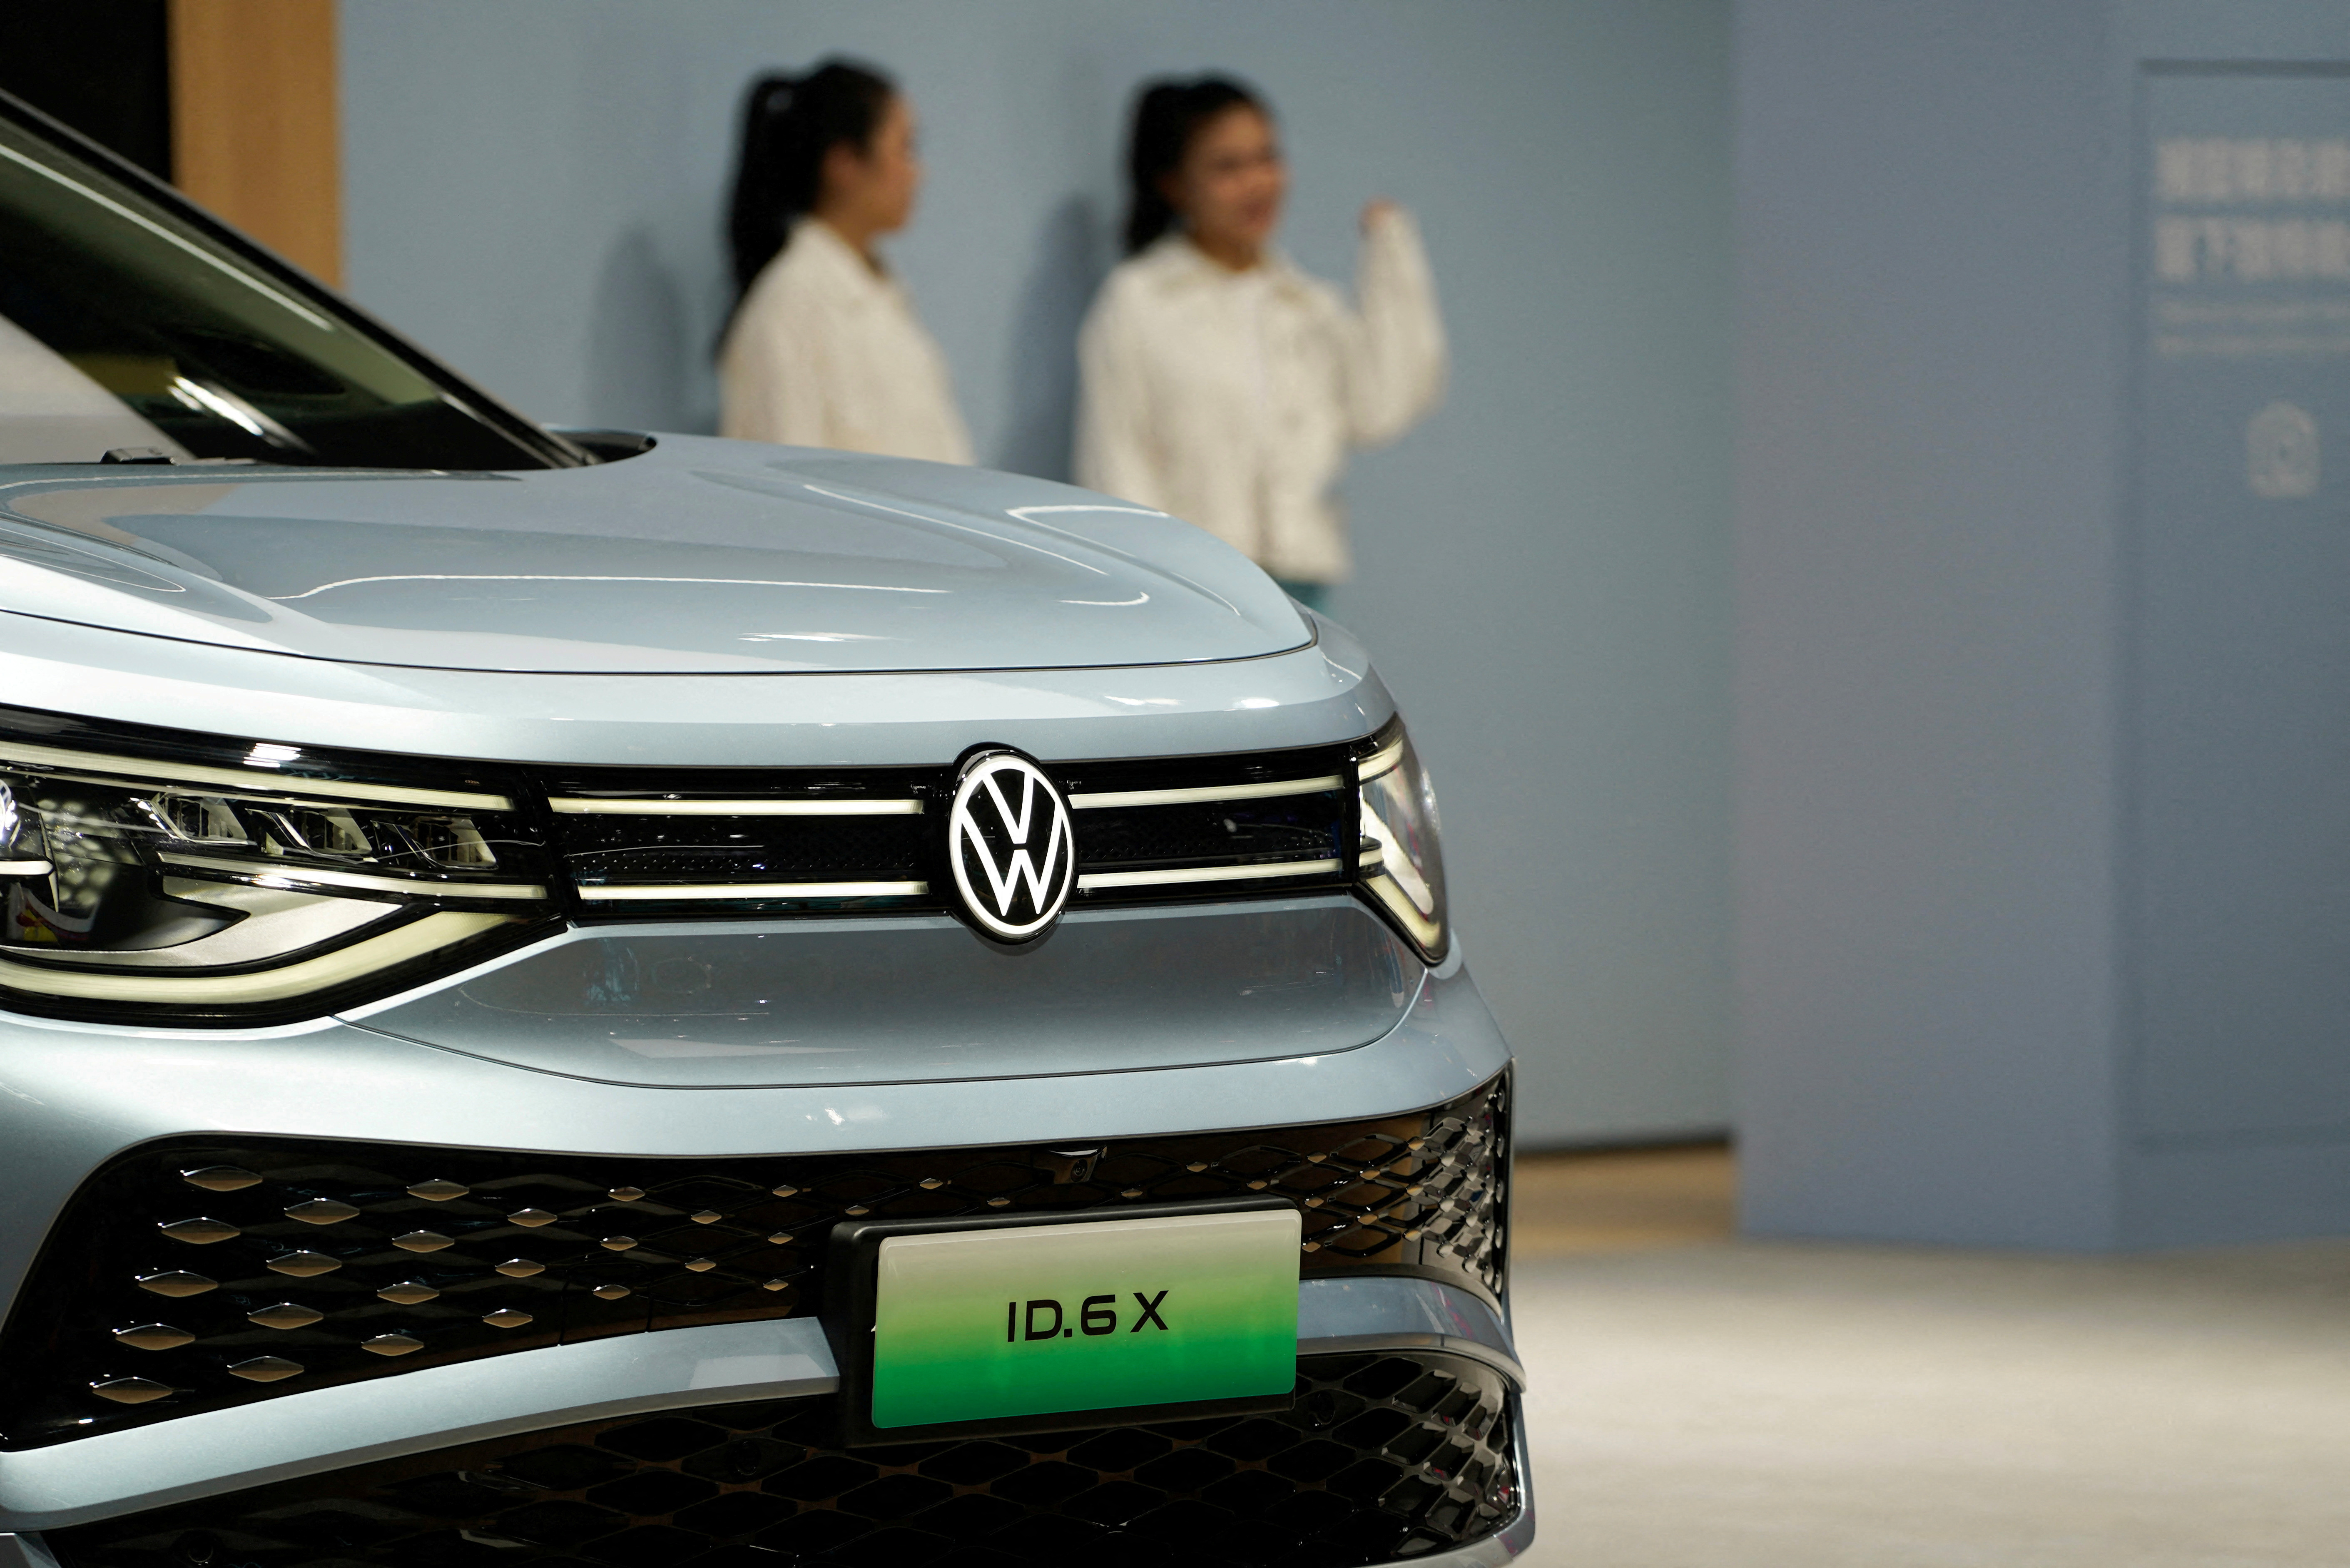 A Volkswagen ID.6 X is displayed at the Auto Shanghai show, in Shanghai